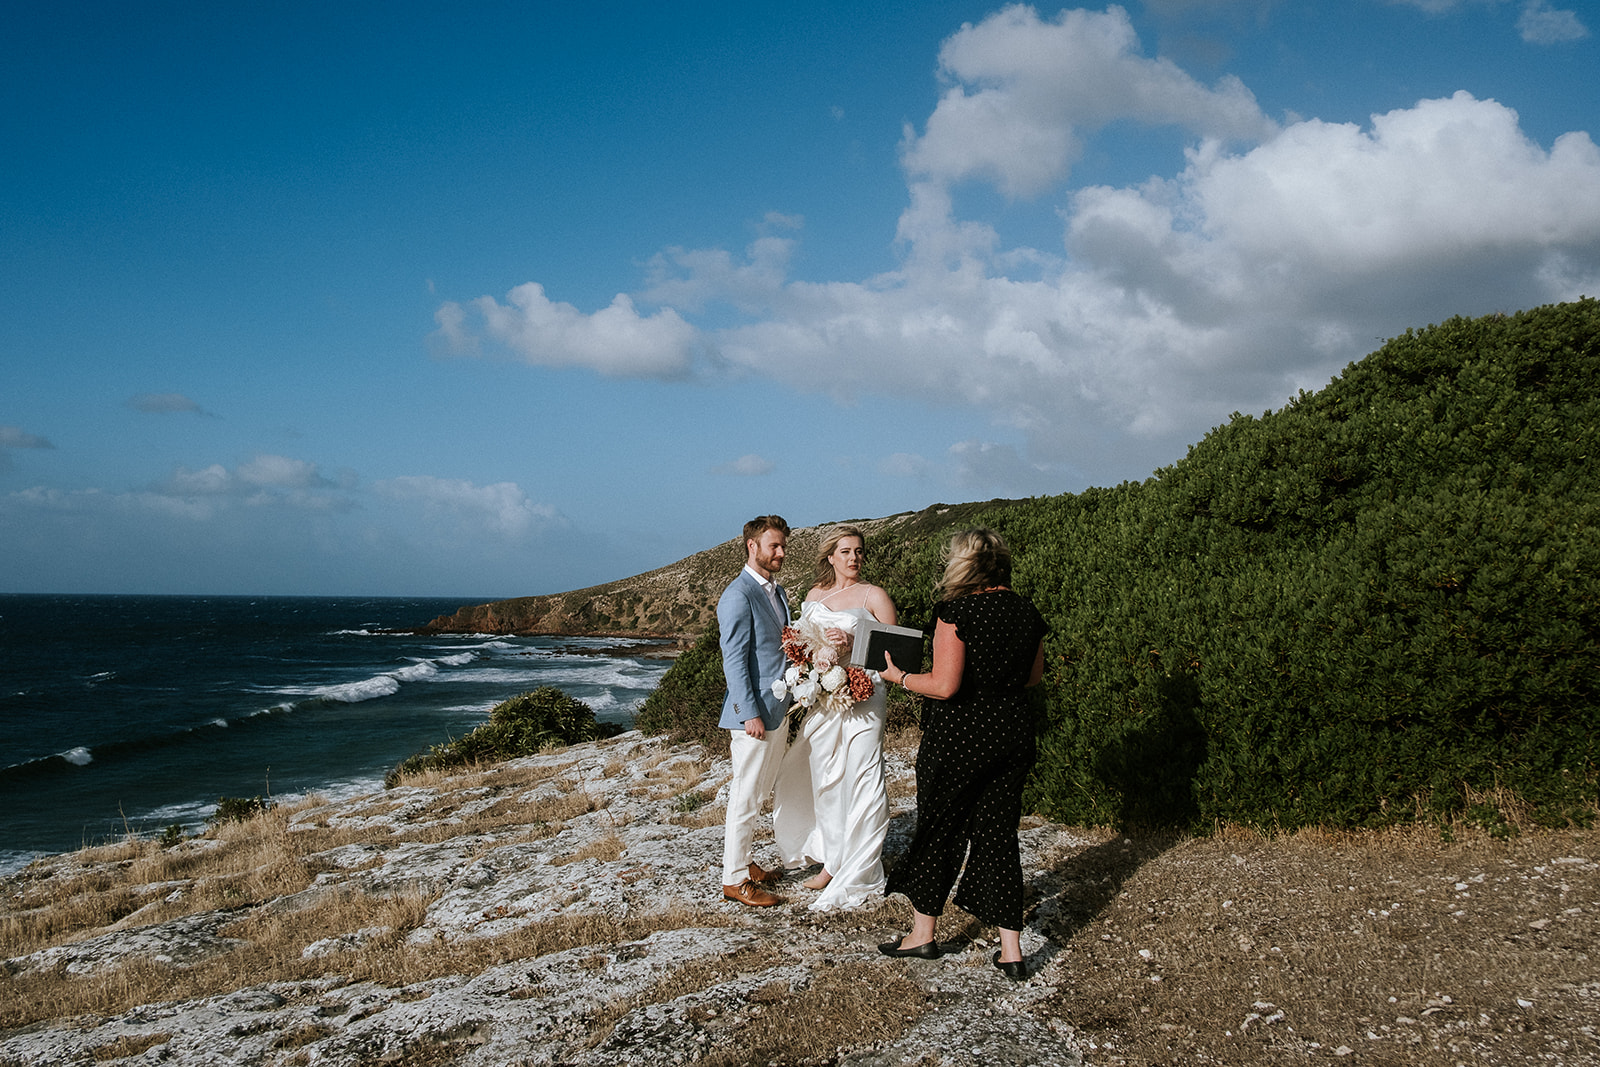 Katie and Josh exchanging the vows on a clifftop overlooking Stoked Bay during their elopement on Kangaroo Island